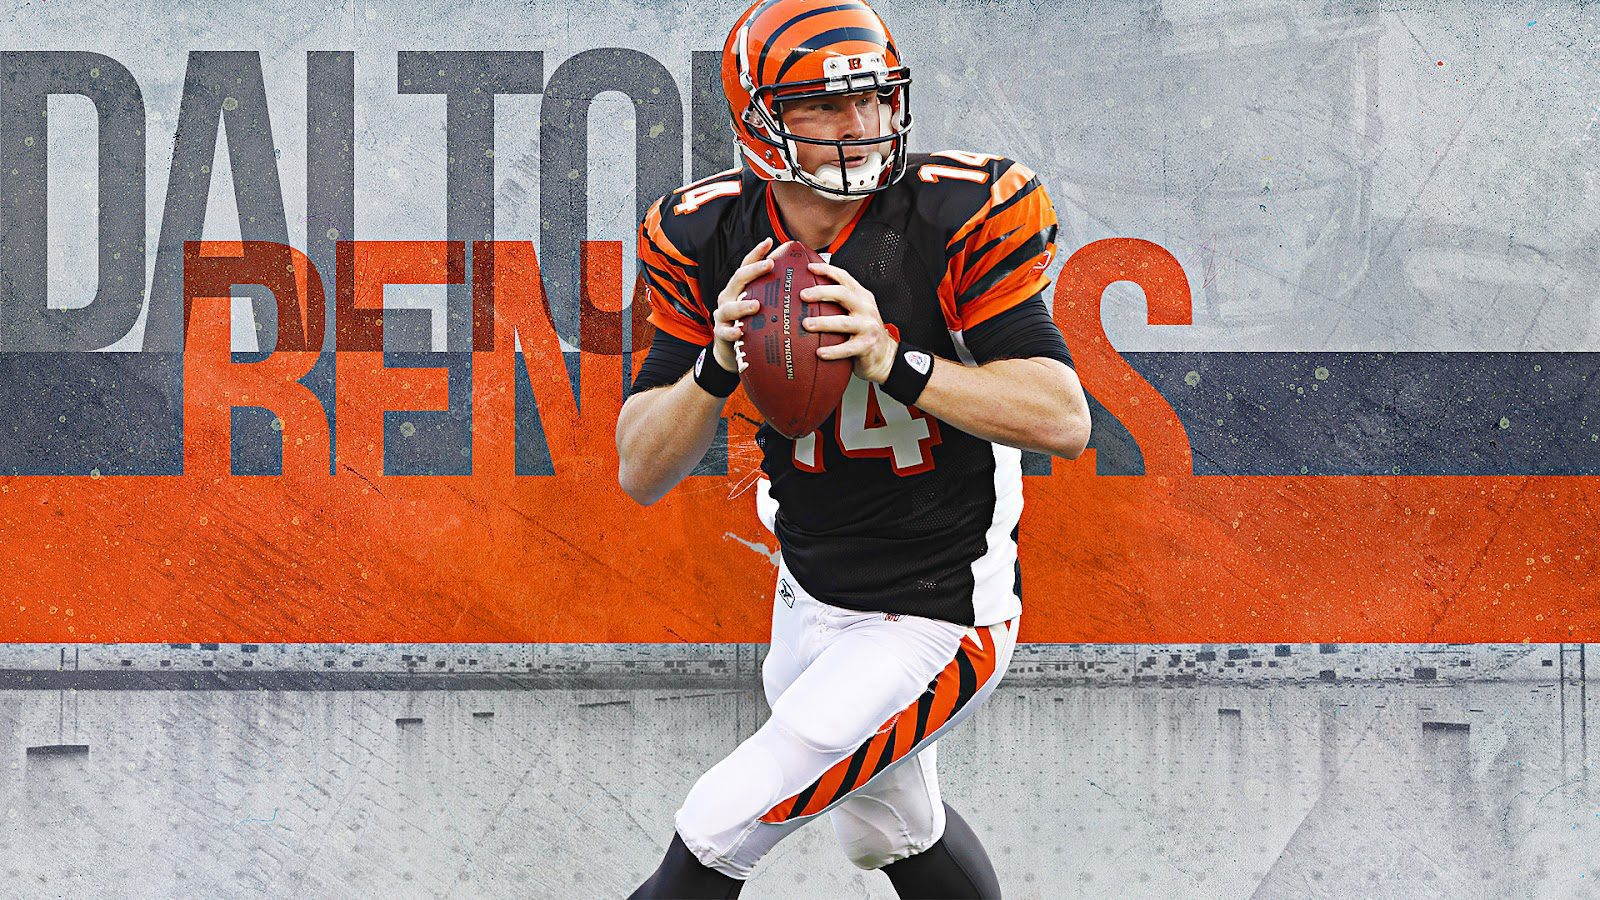 The Bengals are 3-0, but how much longer can they hold onto it?